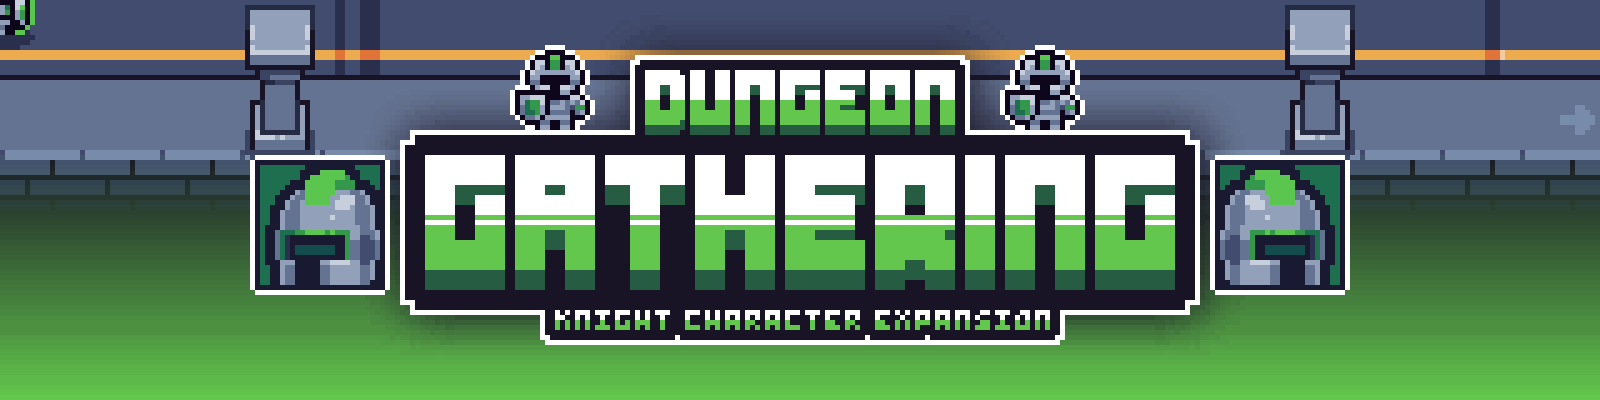 Dungeon Gathering - Knight character expansion (16x16) + Updates